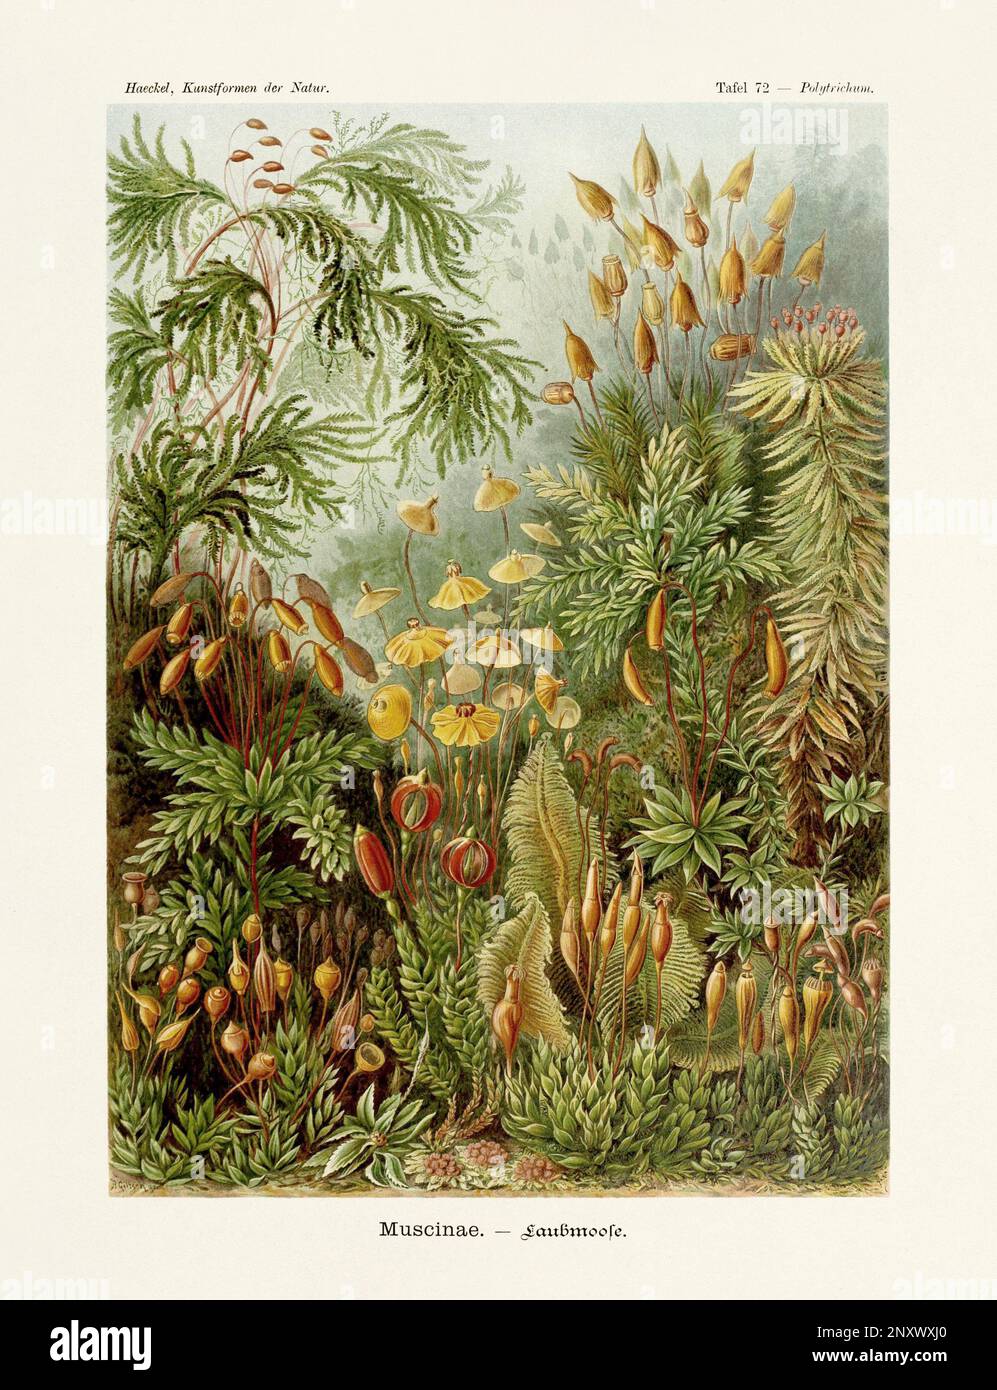 ERNST HAECKEL ART - Muscinae - 19th Century - Antique Botanical illustration - Illustrations of the book : “Art Forms in Nature” Stock Photo